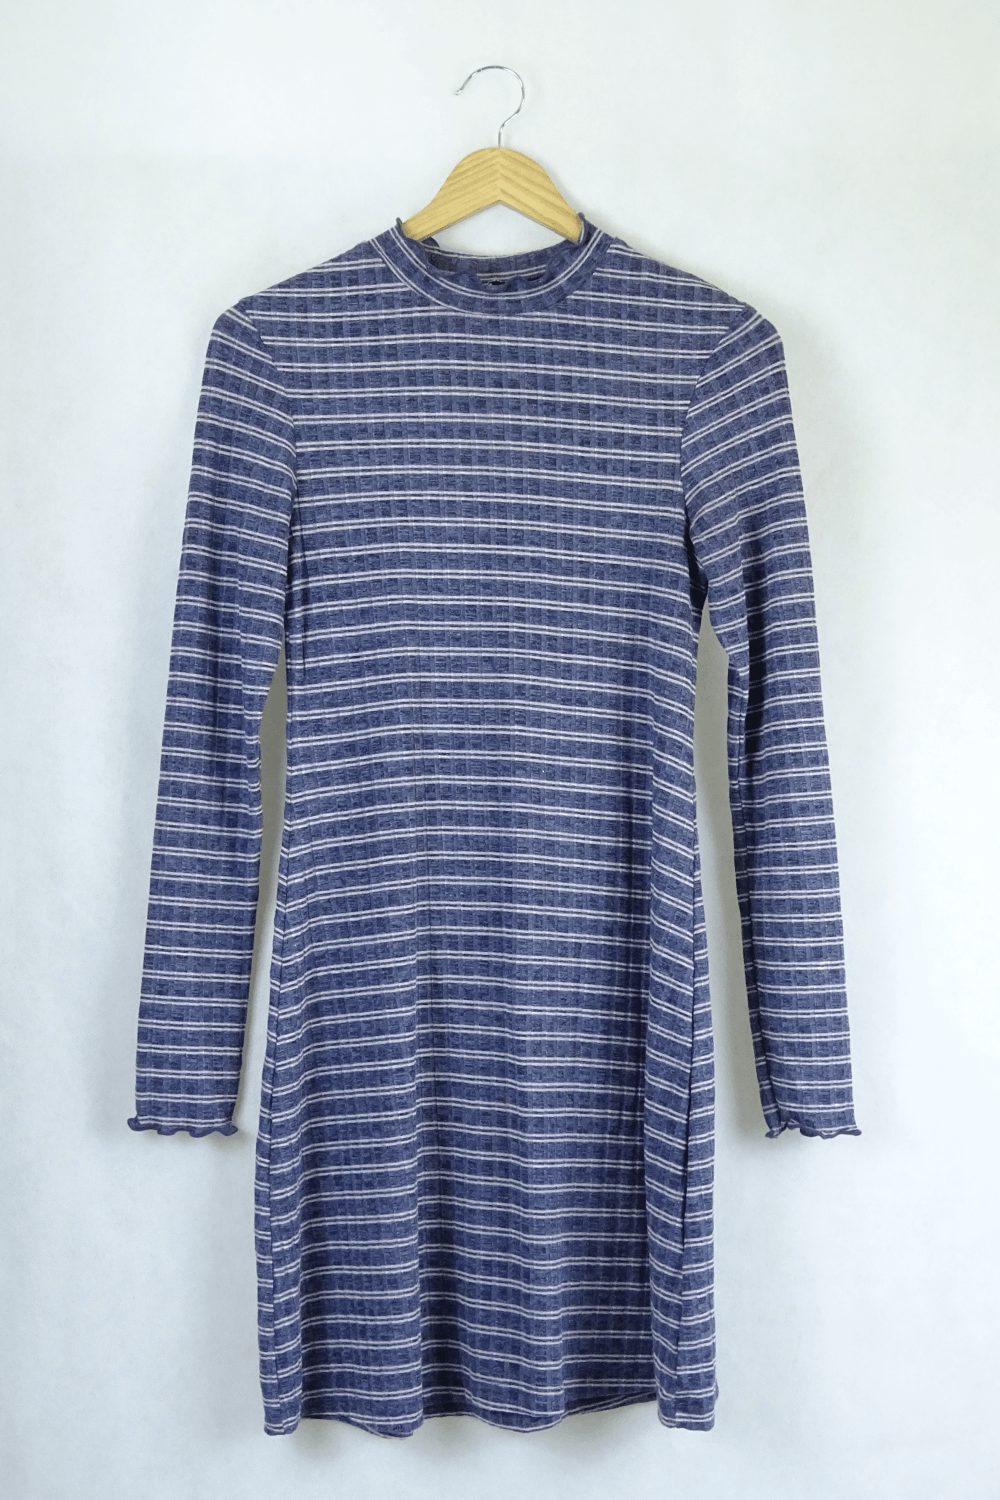 All About Eve Blue Long Sleeve Dress 8